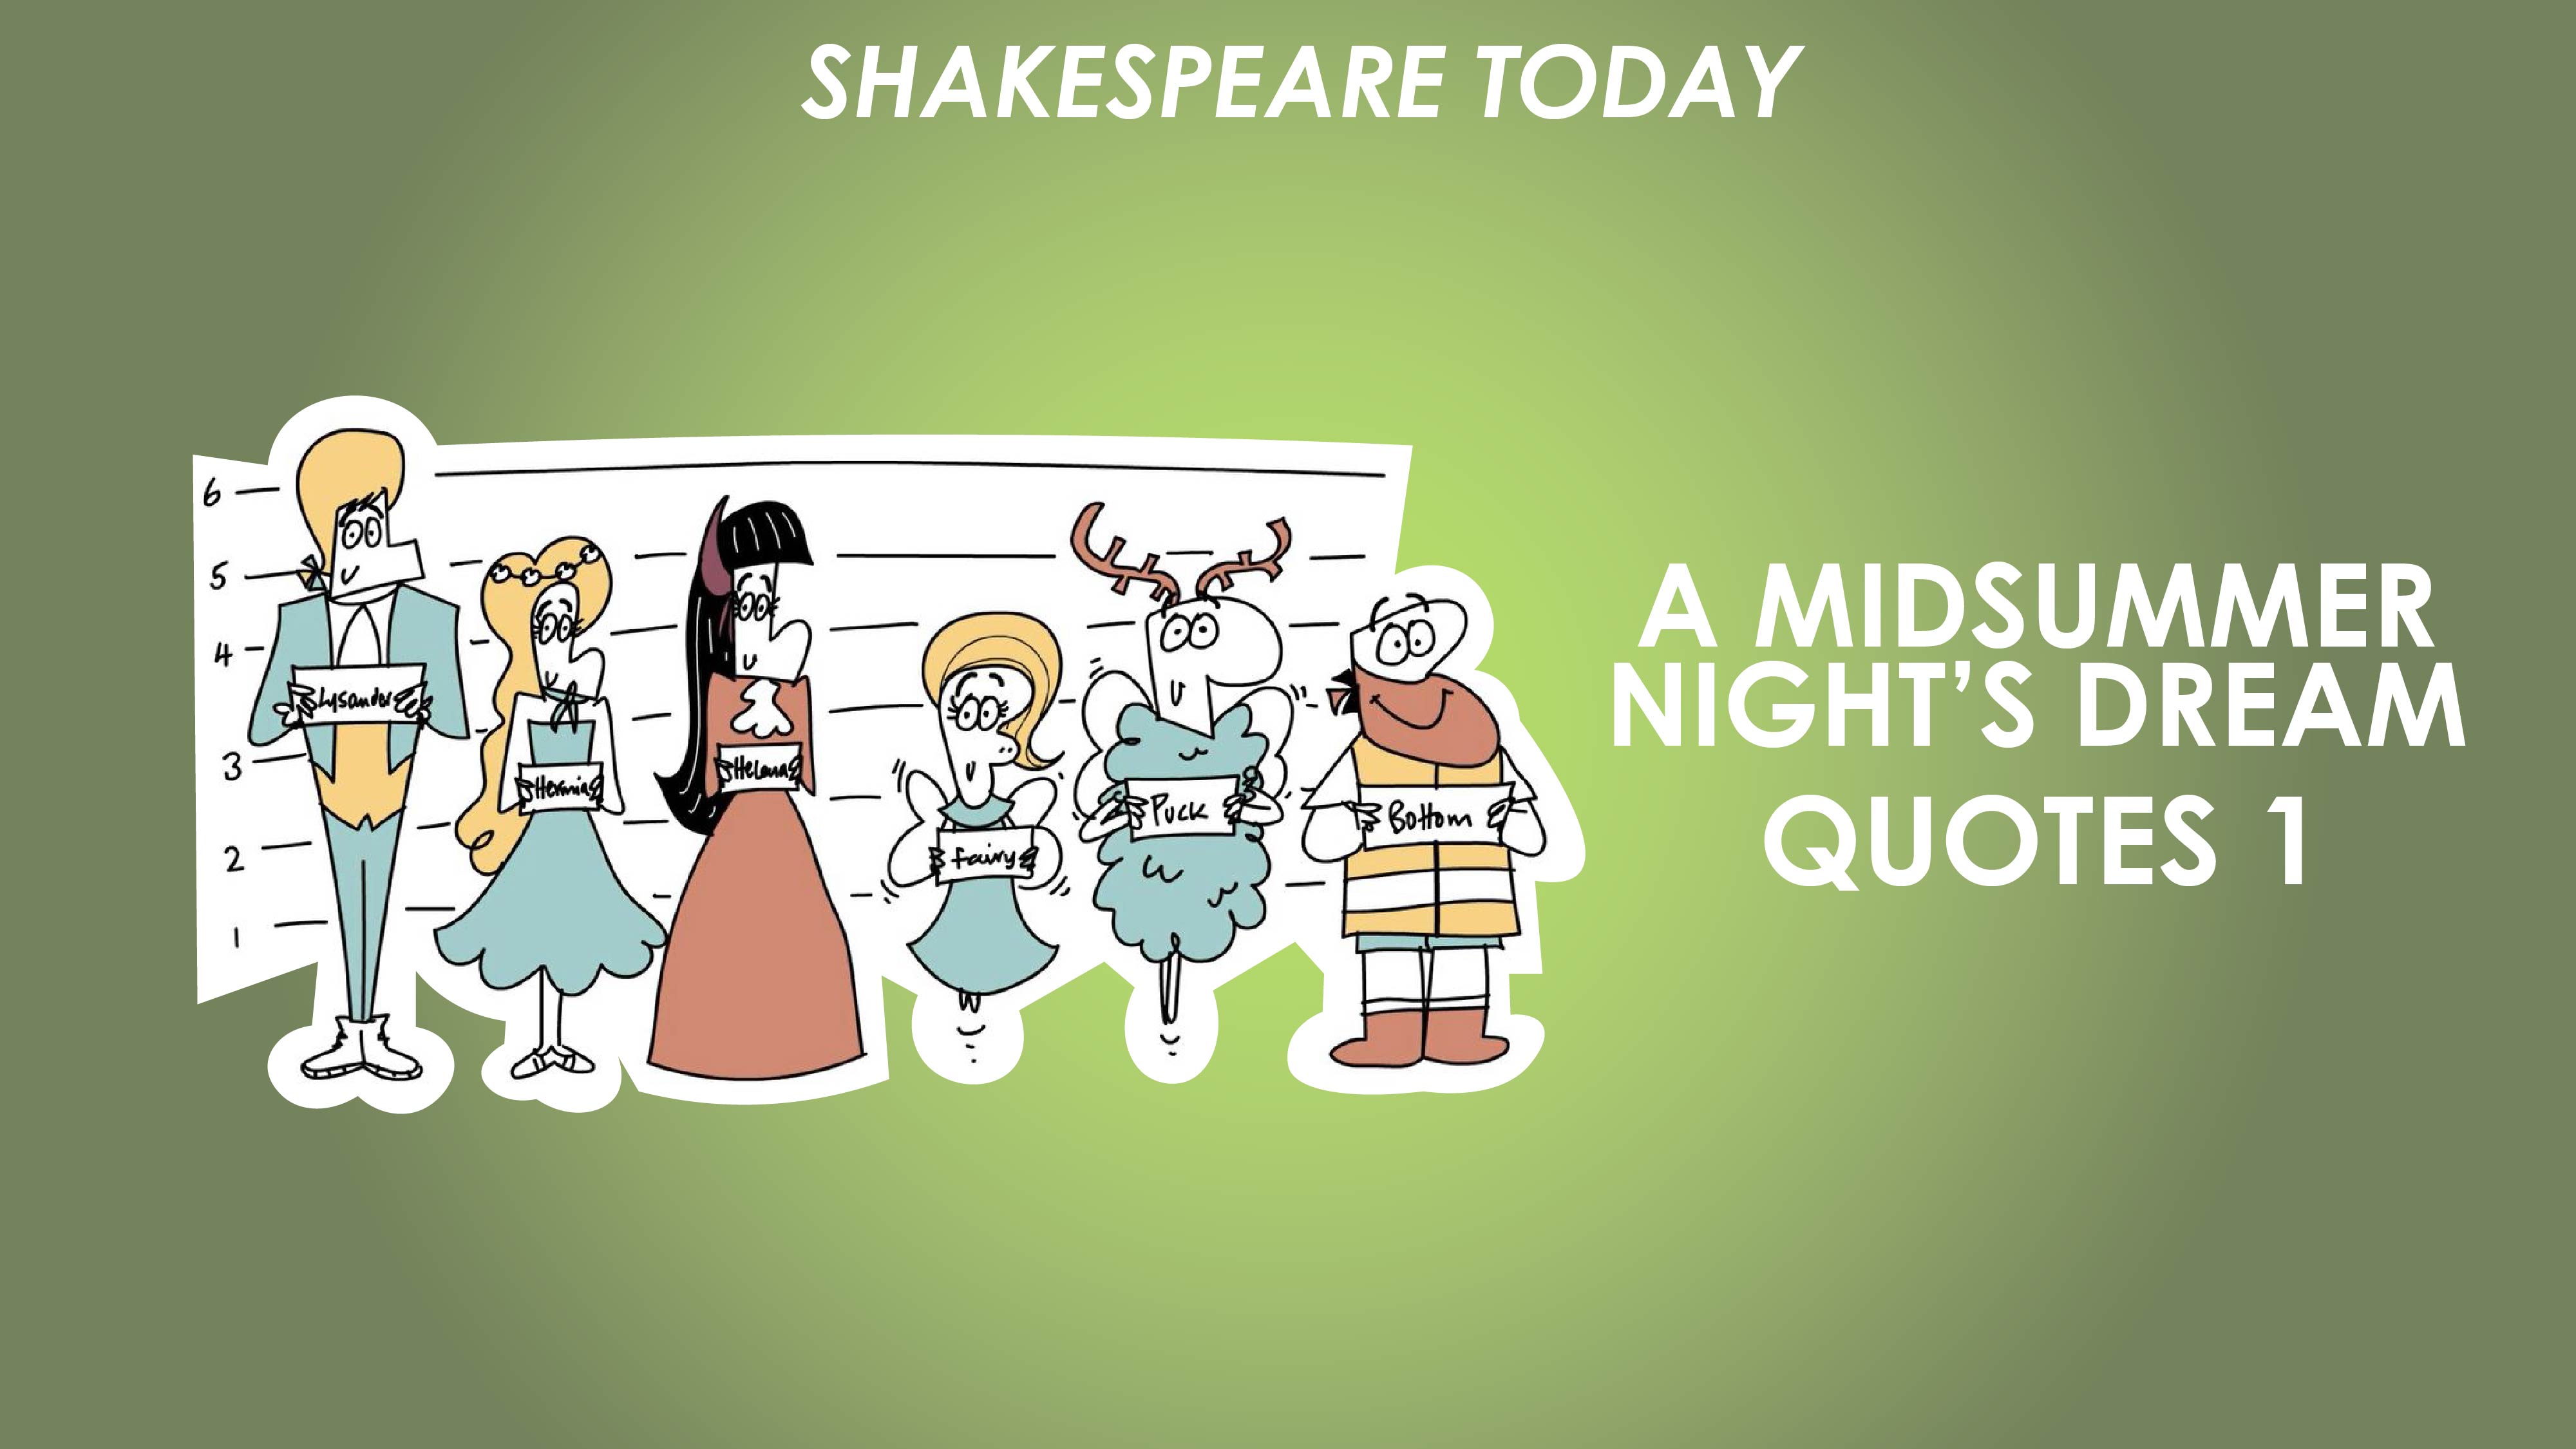 A Midsummer Night's Dream Key Quotes Analysis Part 1 - Shakespeare Today Series